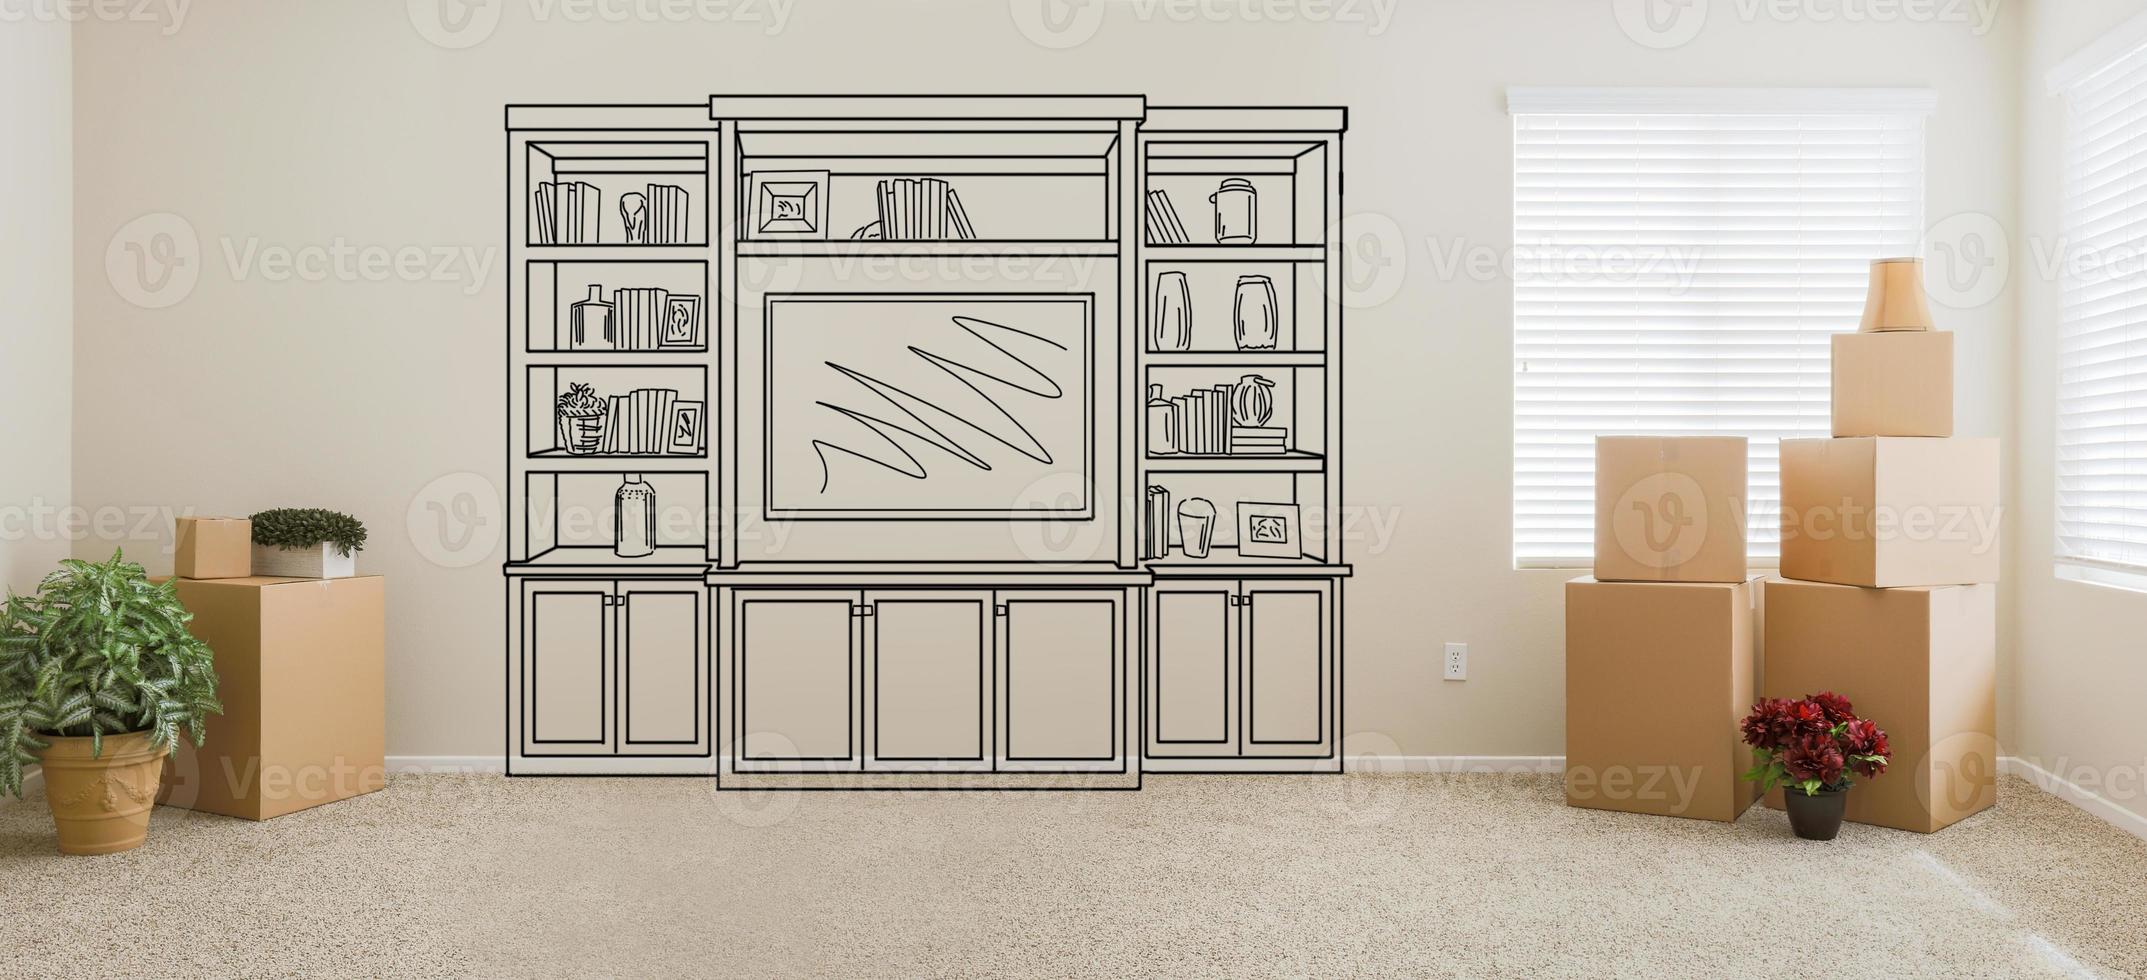 Empty Room With Moving Boxes and Entertainment Unit Drawing On Wall photo